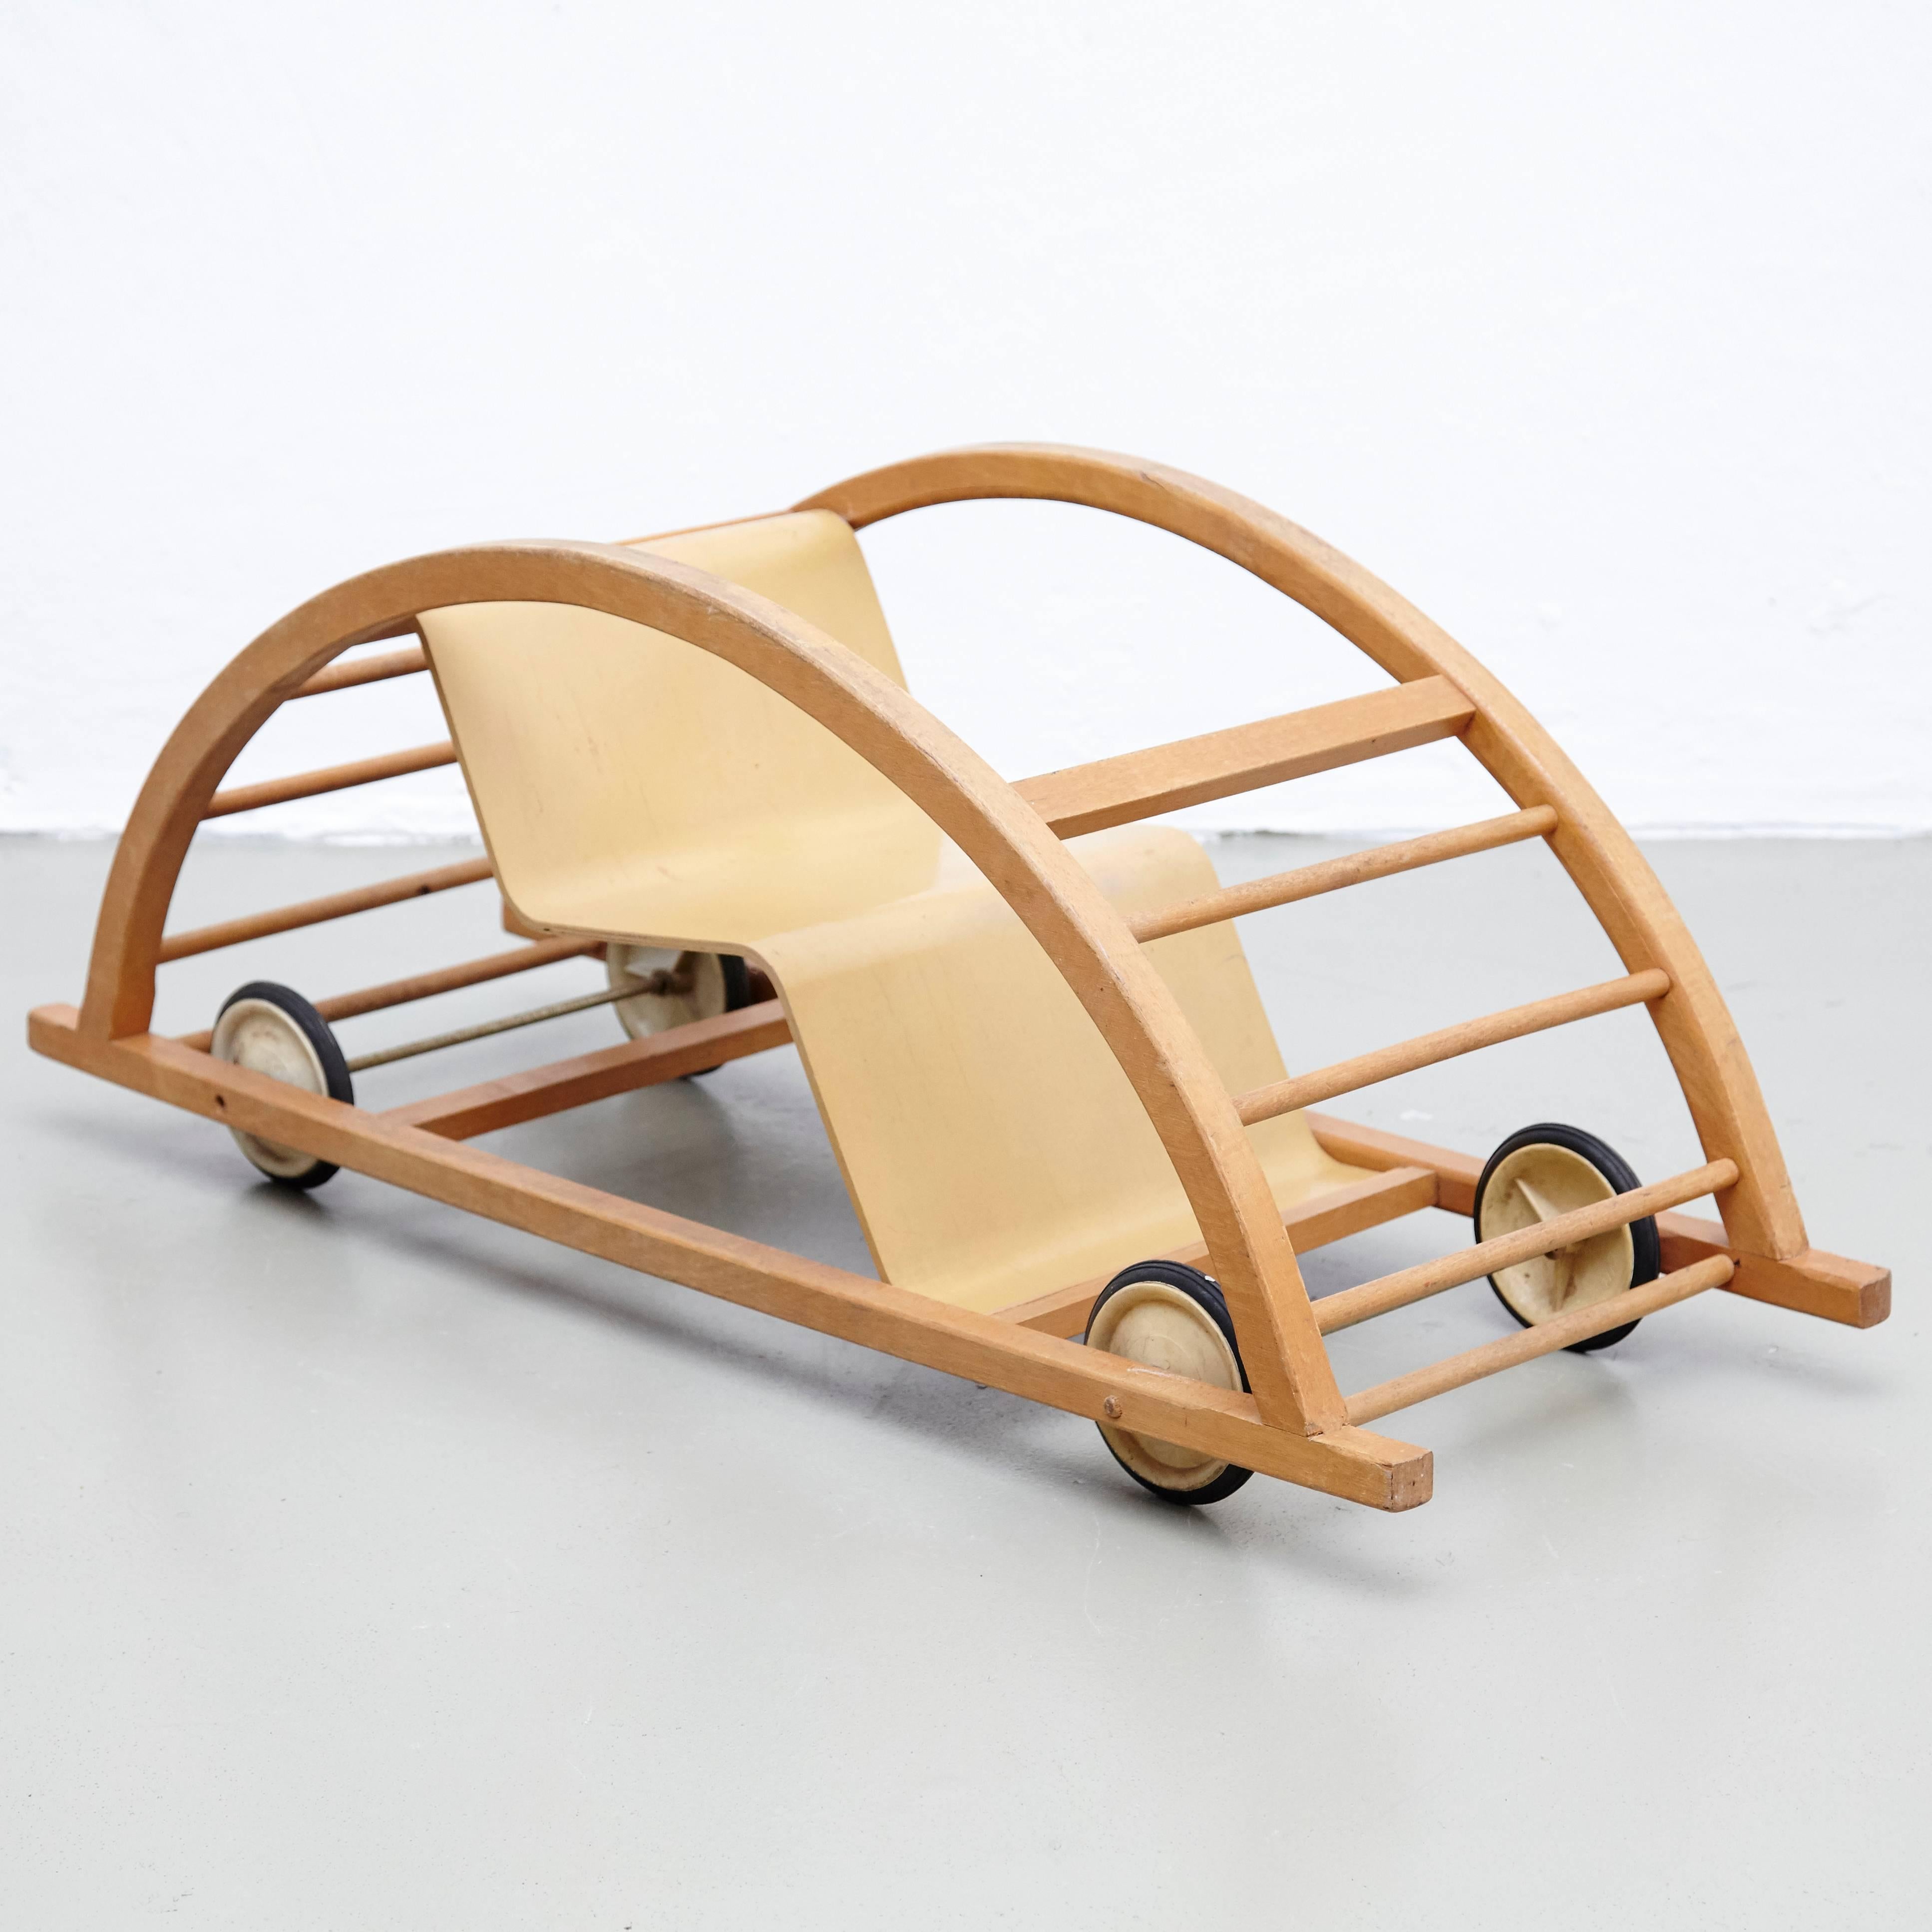 Rocking car, aka "der Schaukelwagen", designed by Hans Brockhage and Erwin Andrä, circa 1960.
Manufactured by Siegfried Lenz.

In good original condition, with minor wear consistent with age and use.

During they studies at the Academy of